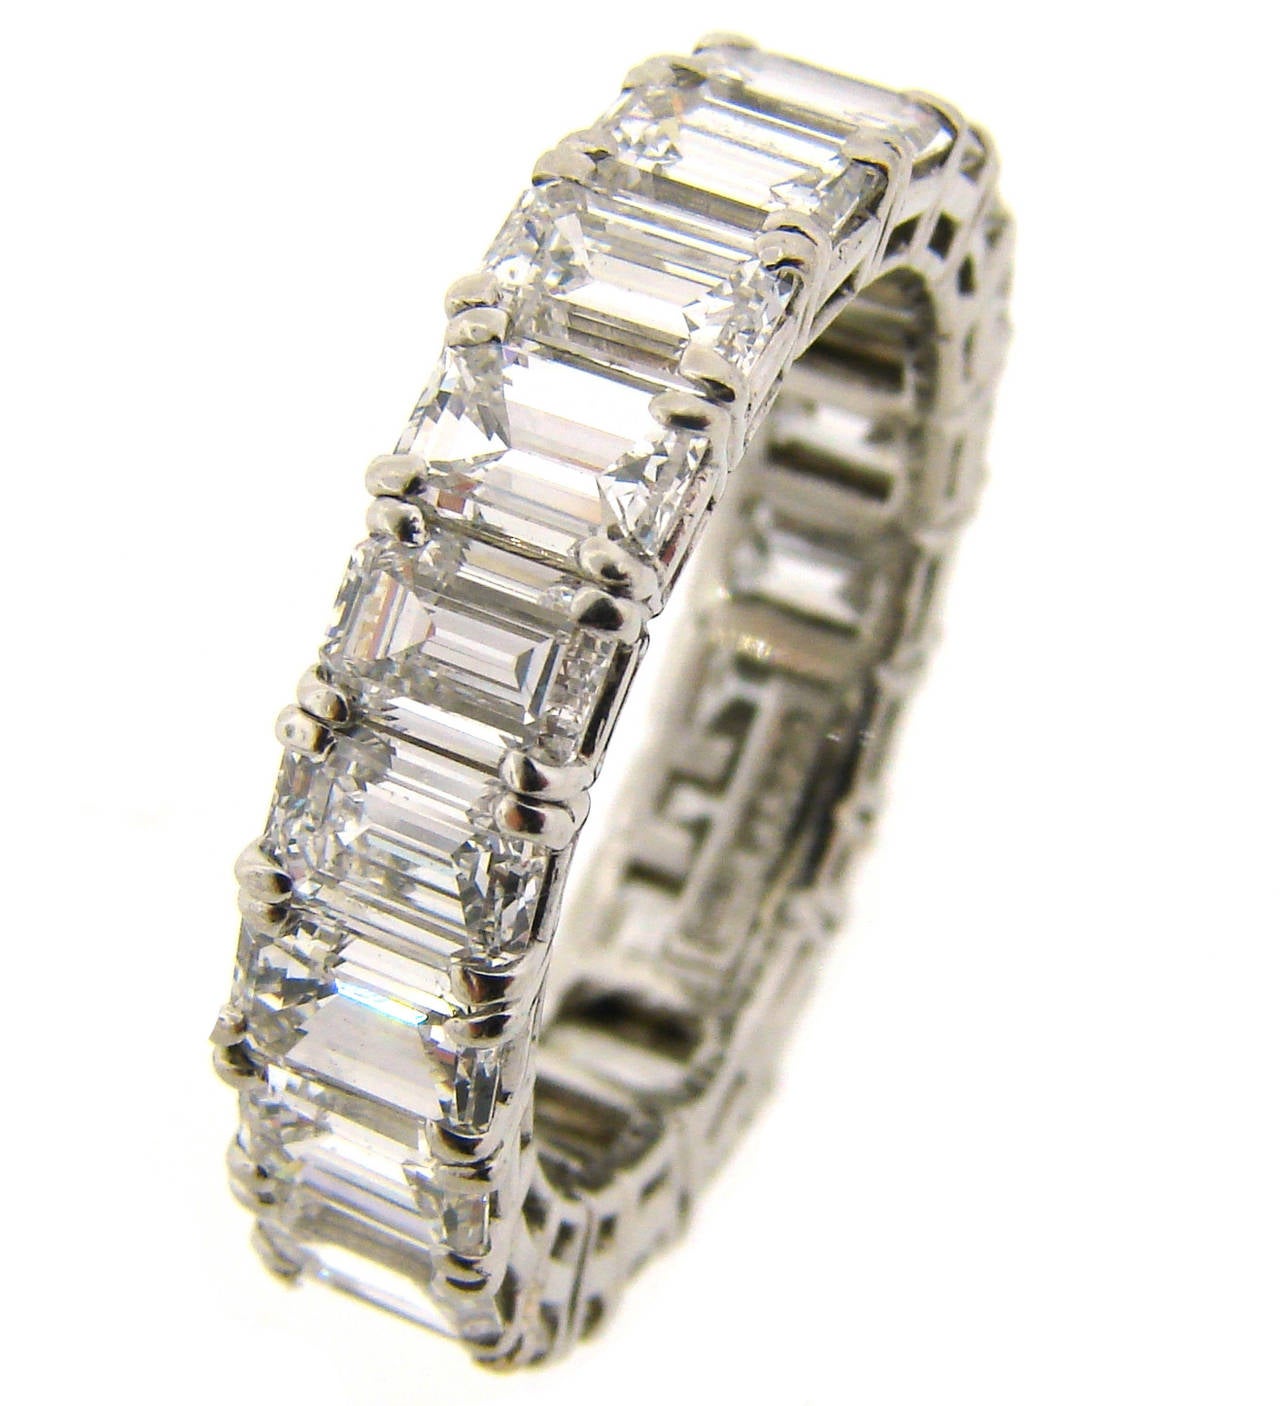 Stunning diamond & platinum eternity band created by a renowned jeweler Harry Winston. Features twenty one emerald cut diamond set in platinum. The diamonds are F-G color, VVS2-VS1 clarity. The diamonds total weight approximately 5.89 carats. The